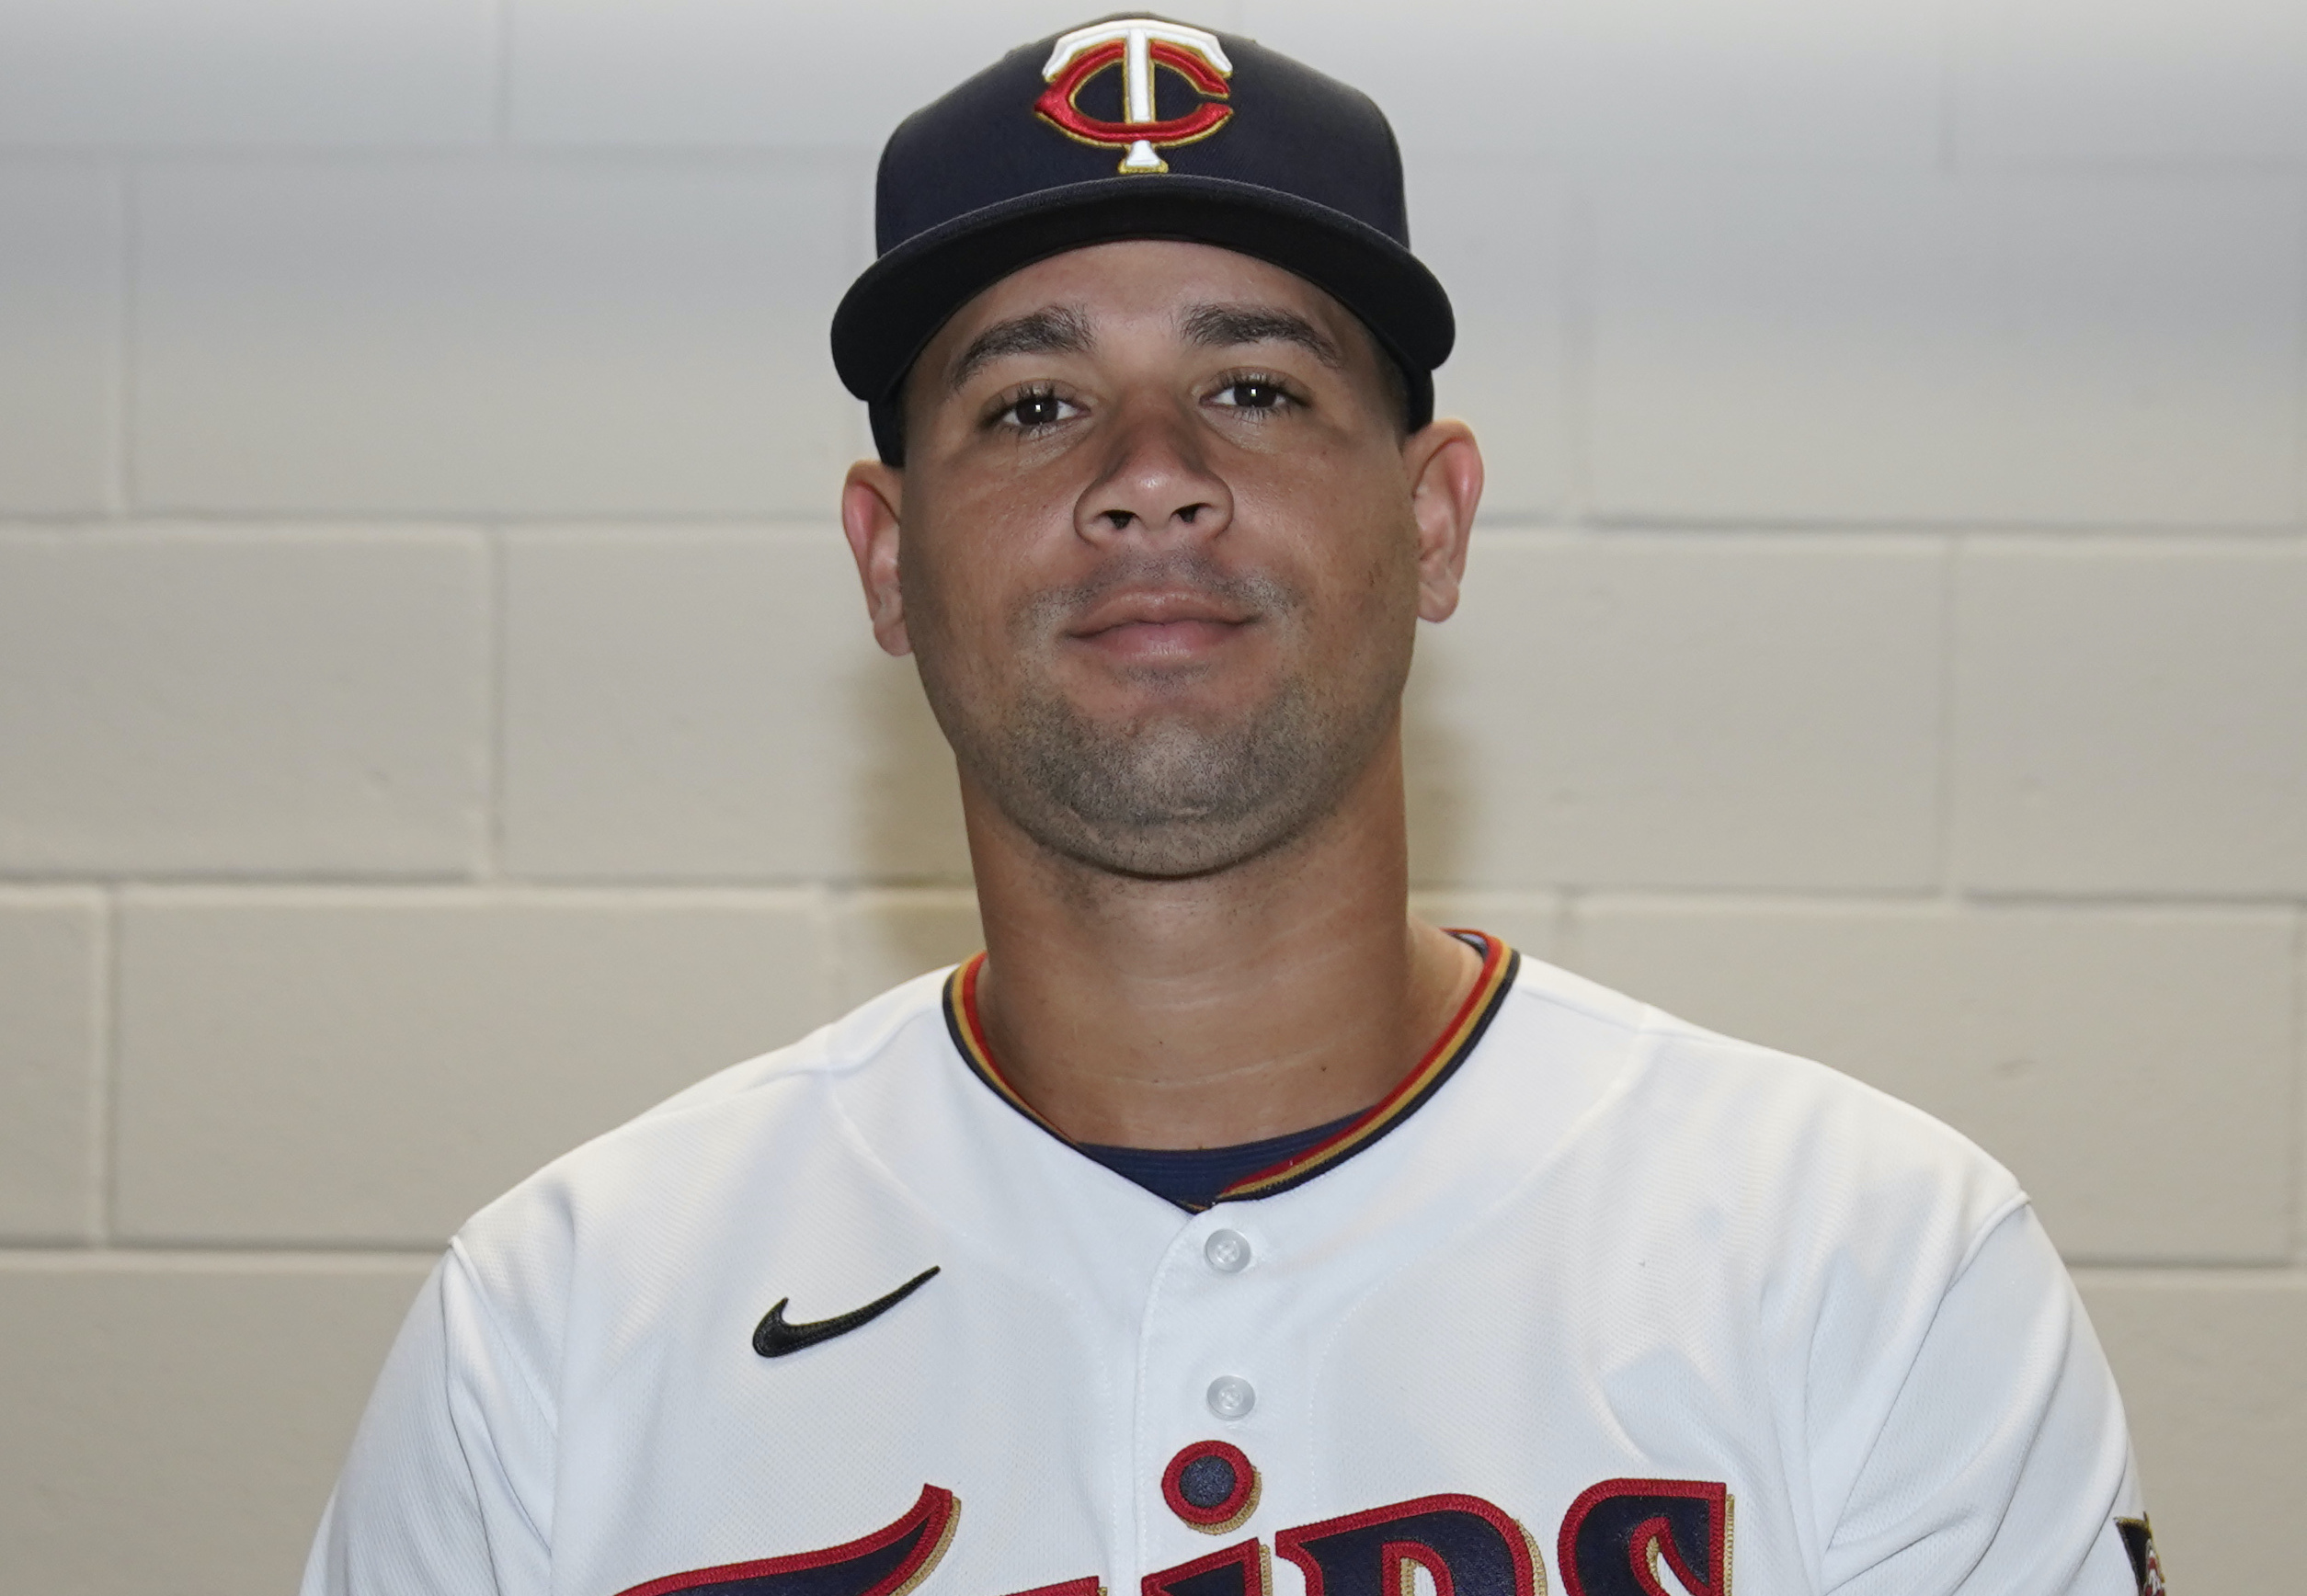 Gary Sanchez of the Minnesota Twins poses for a portrait on Major